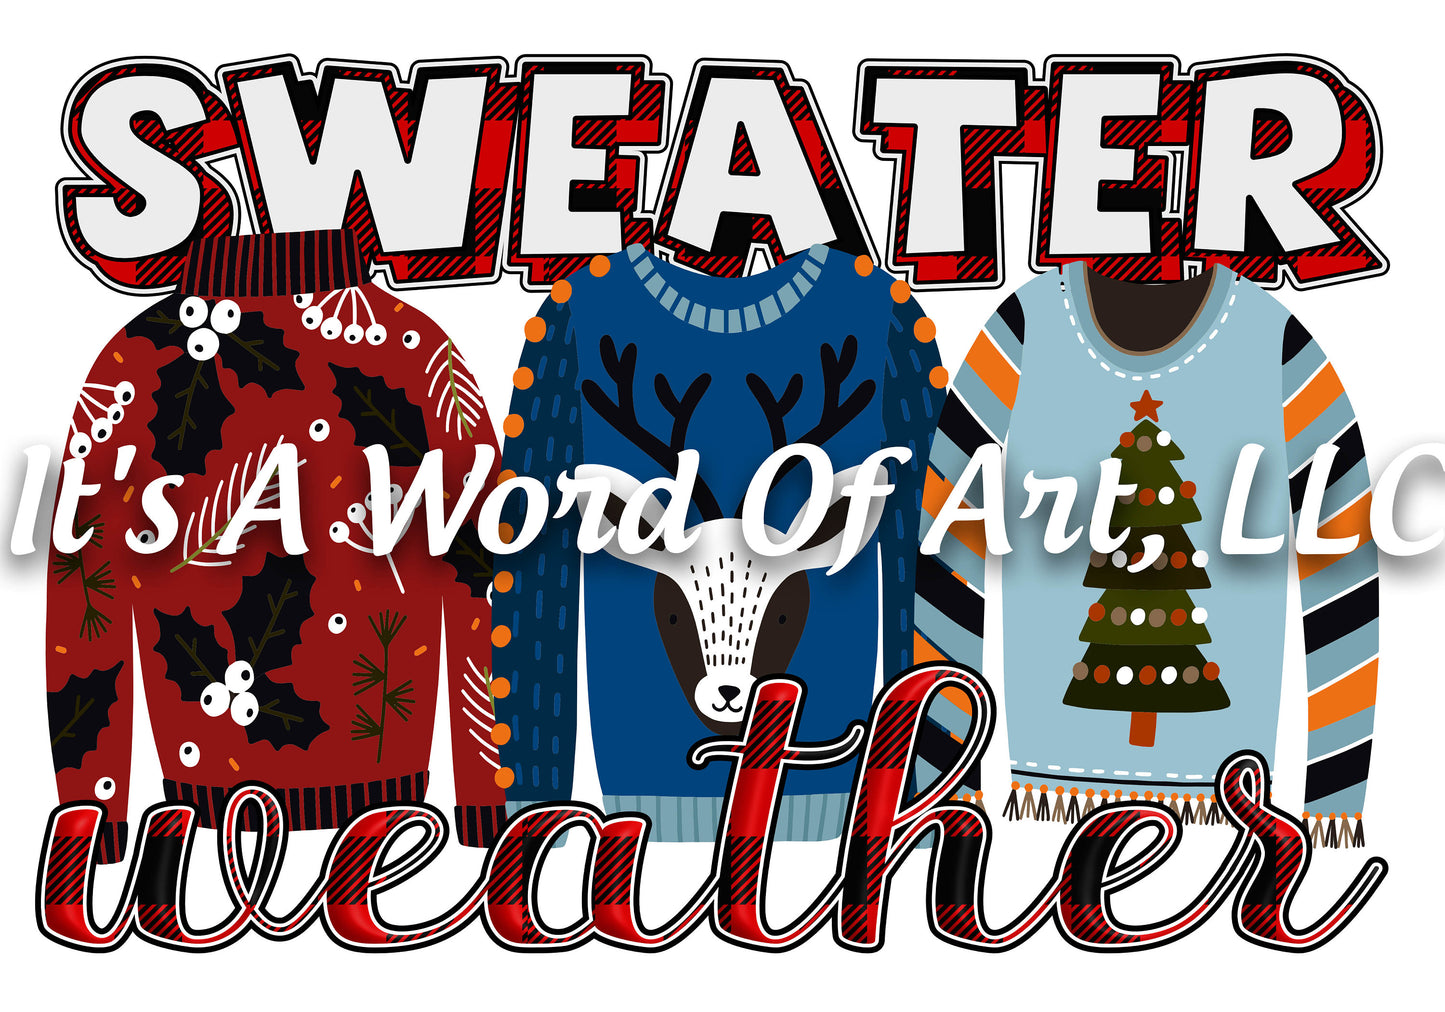 Christmas 171 - Sweater Weather Christmas Sweater - Sublimation Transfer Set/Ready To Press Sublimation Transfer/Sublimation Transfer